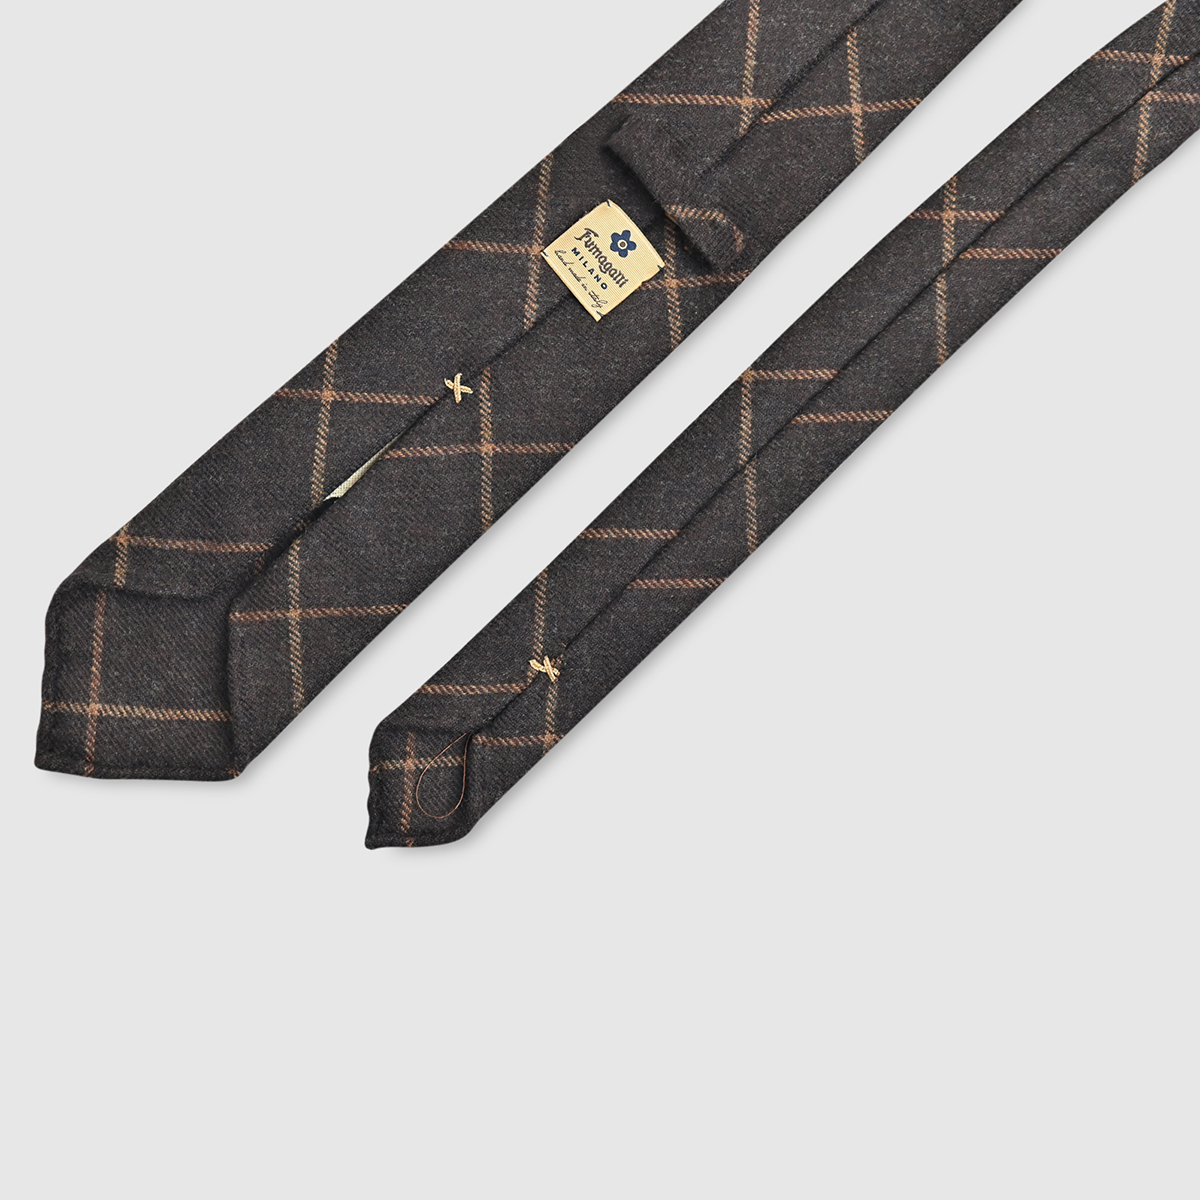 100% Checked Wool Tie Fumagalli 1891 on sale 2022 2